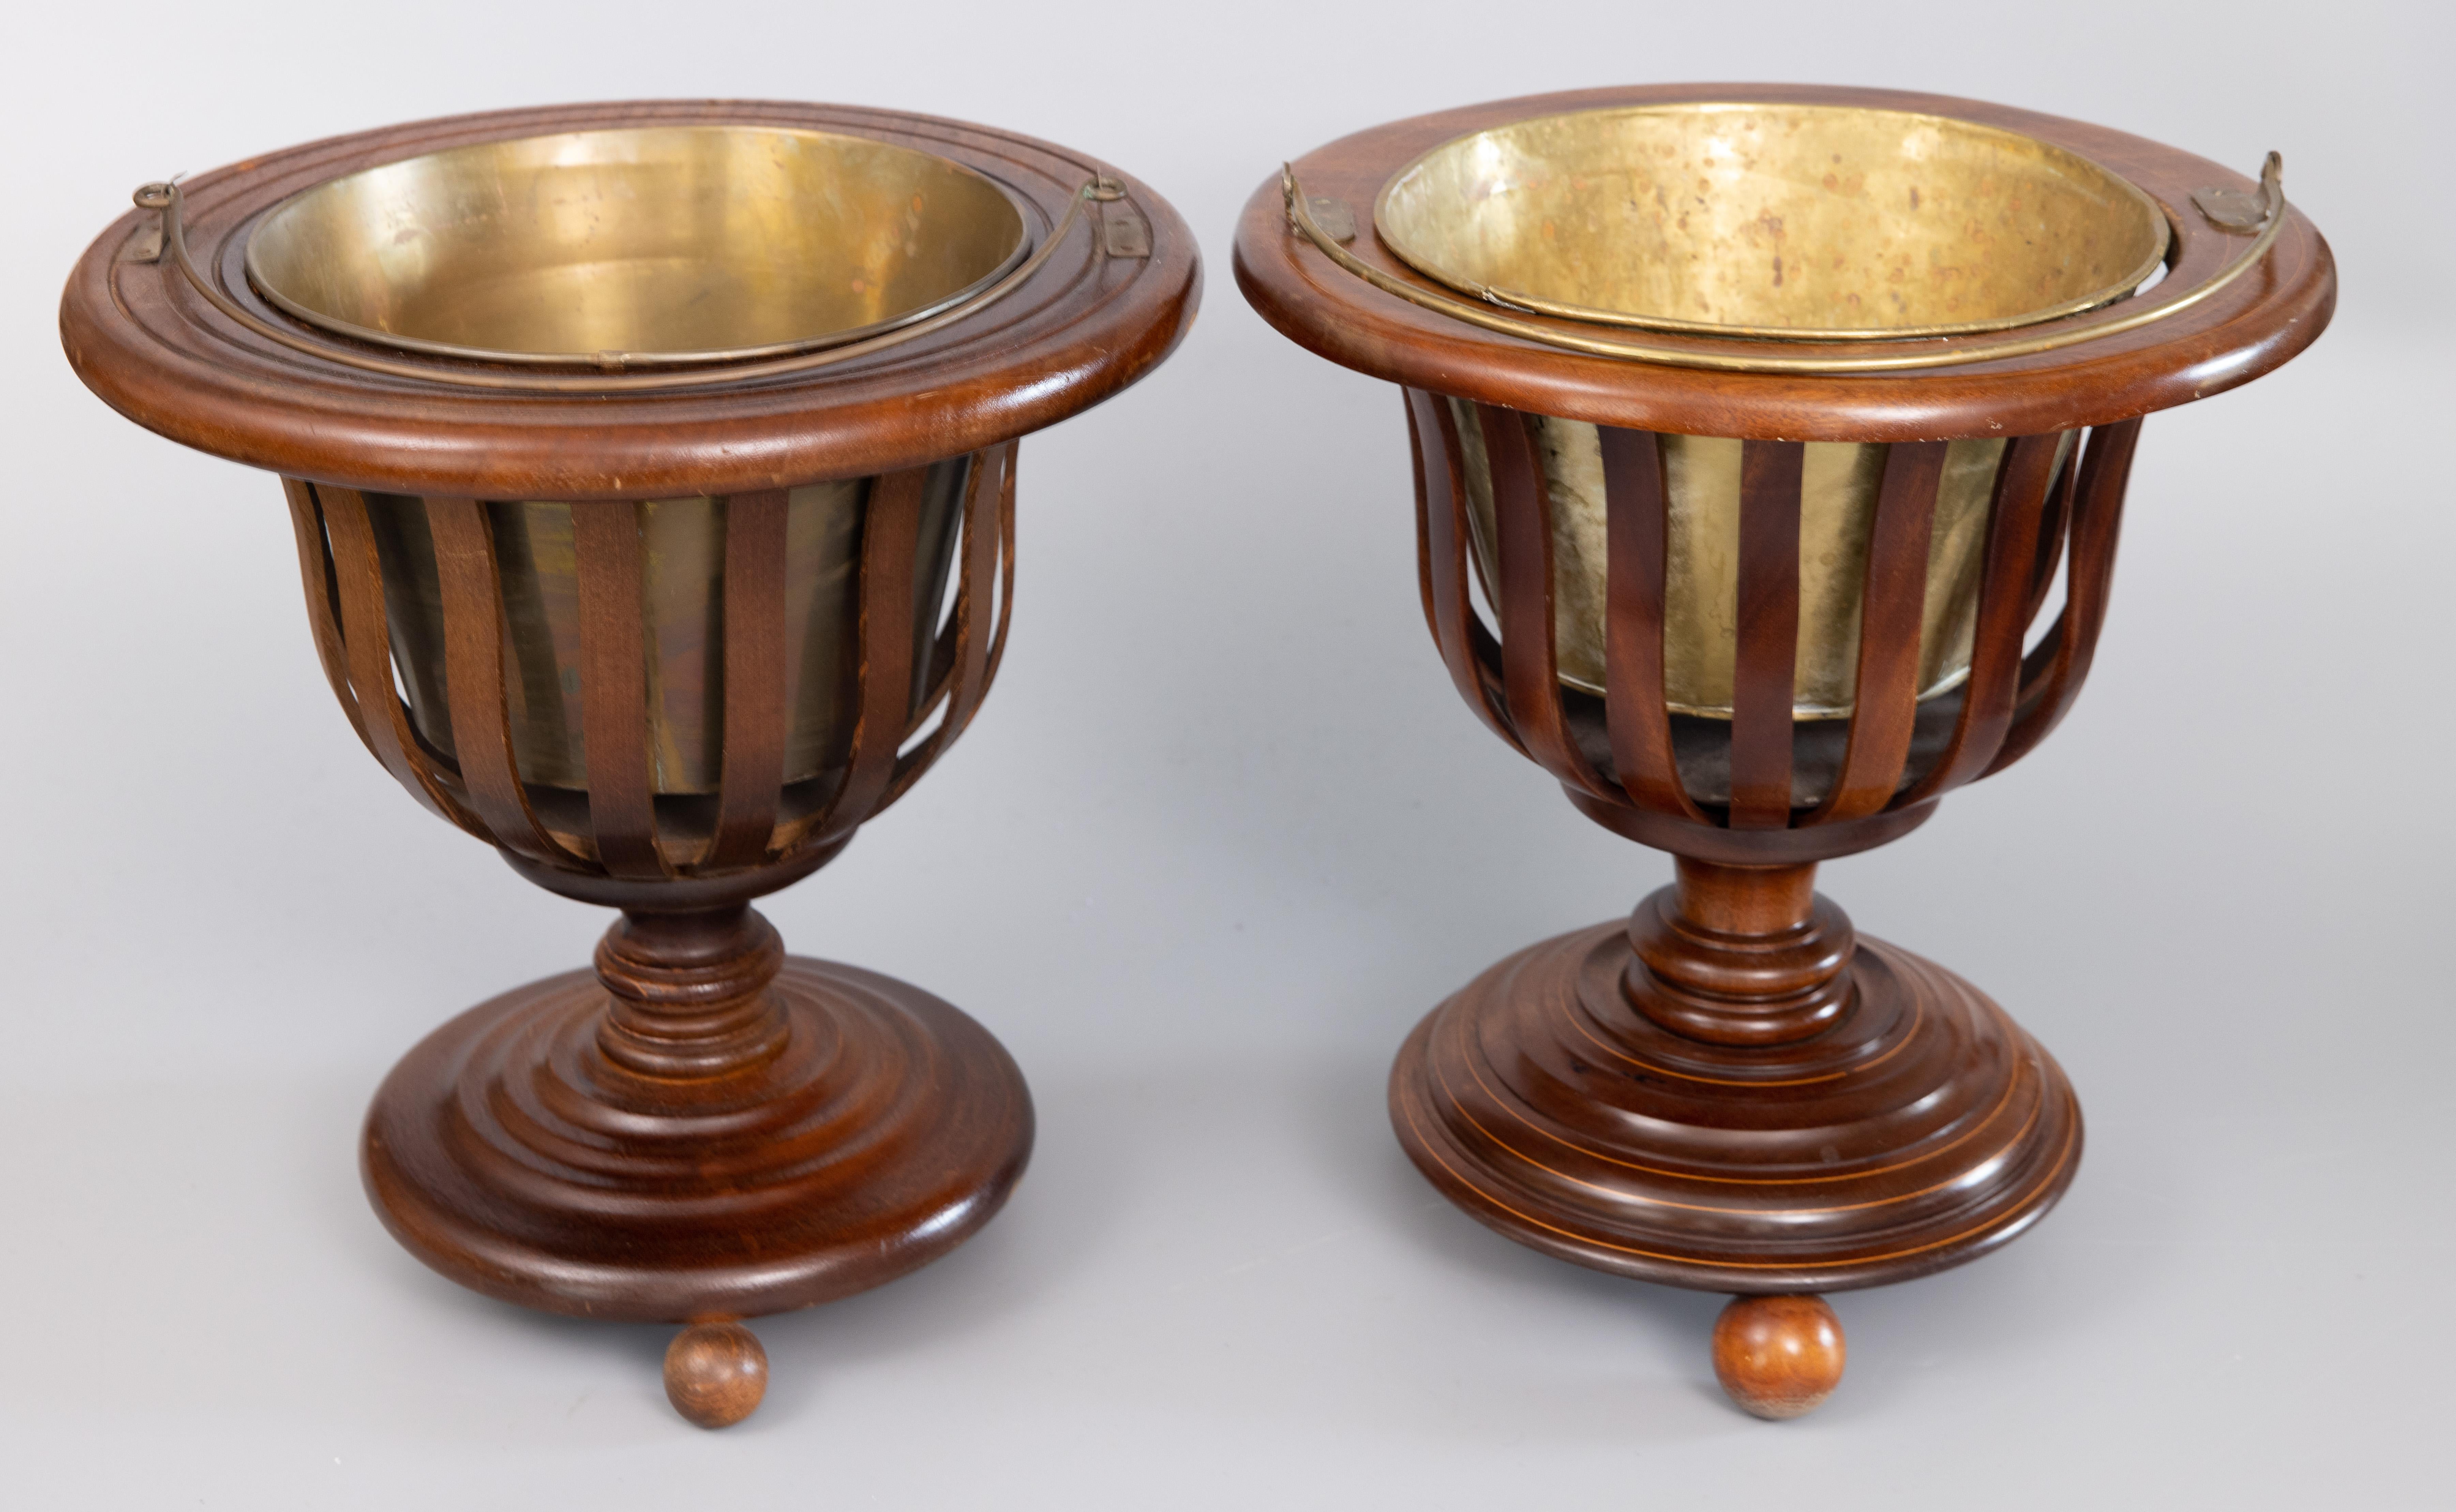 A superb set of two 19th Century English Regency style slatted mahogany peat buckets / jardinieres / planters with the original removable brass liners. These stately jardinieres are a near pair with slight differences, both finely carved with ball